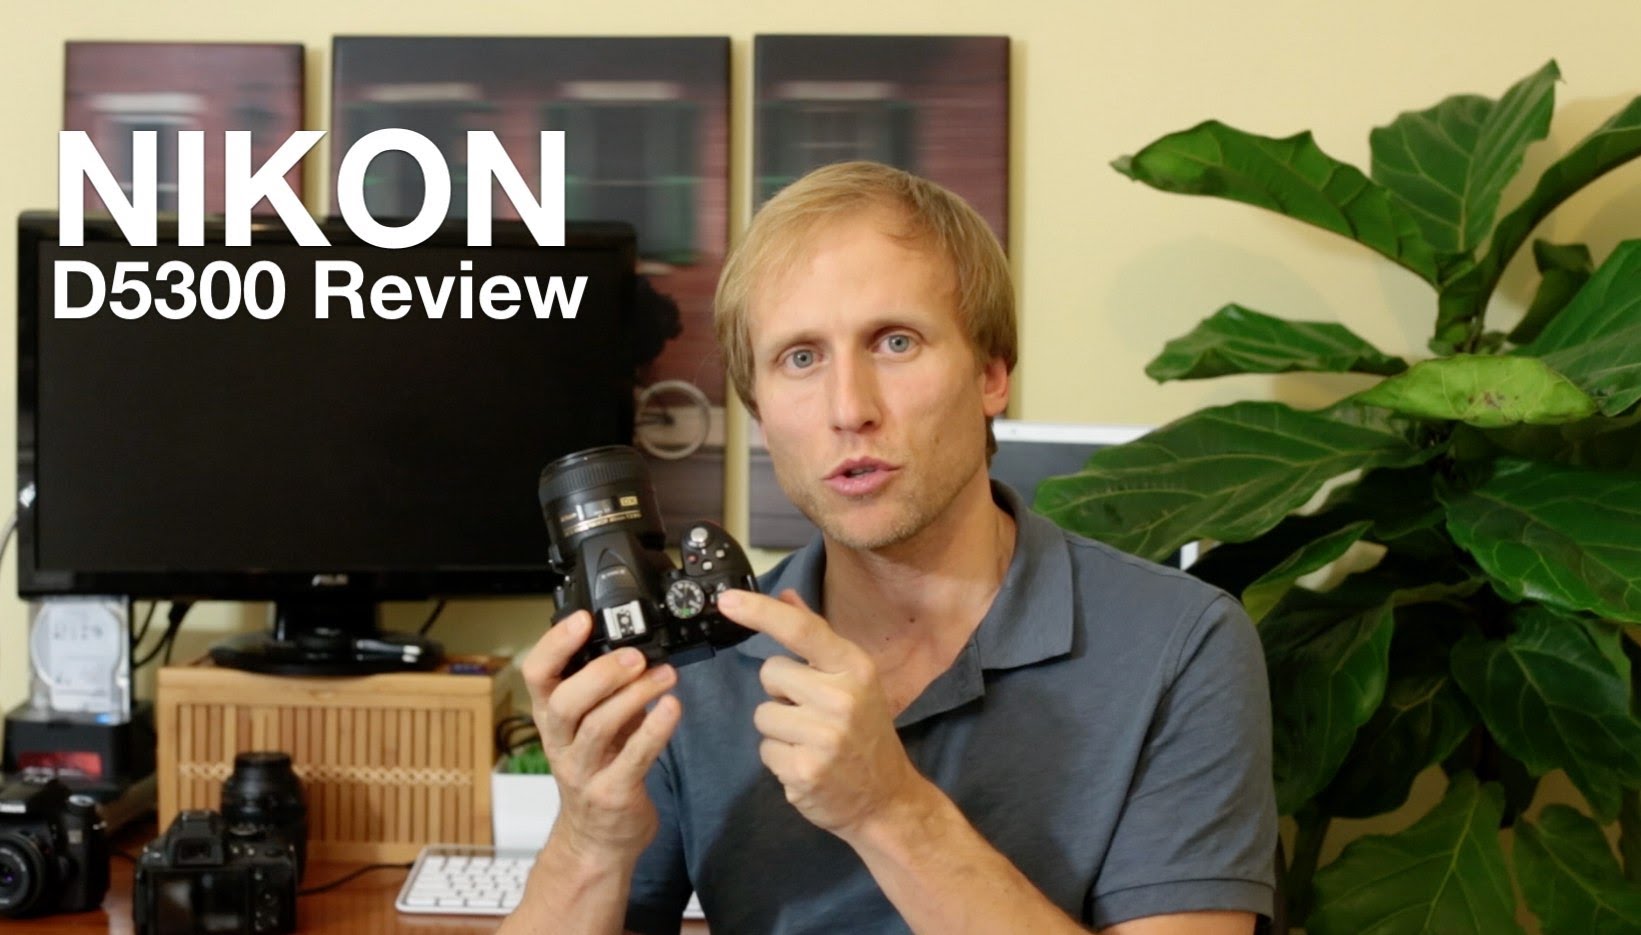 Nikon D5300 Review – The Good, The Less Good and well it’s all mostly good